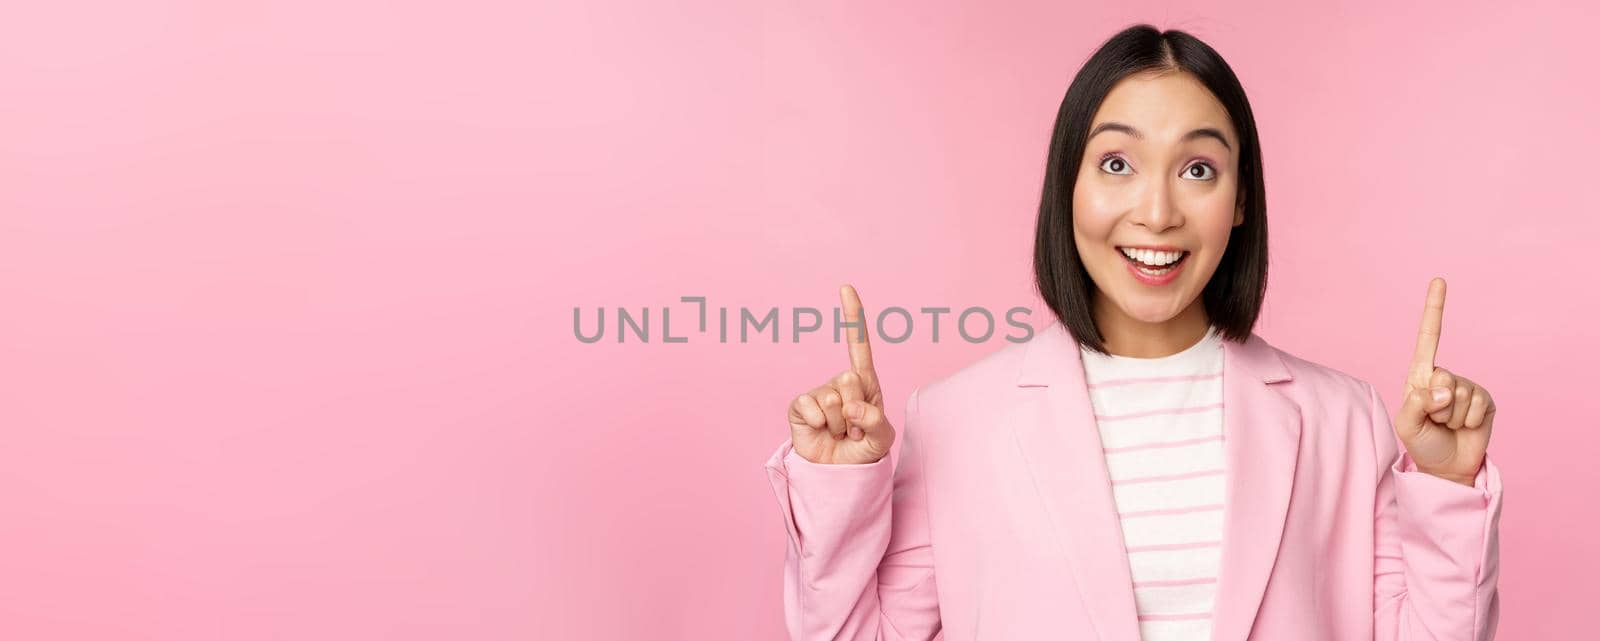 Enthusiastic corporate worker, asian business woman pointing fingers up and smiling, showing advertisement, logo, standing over pink background.